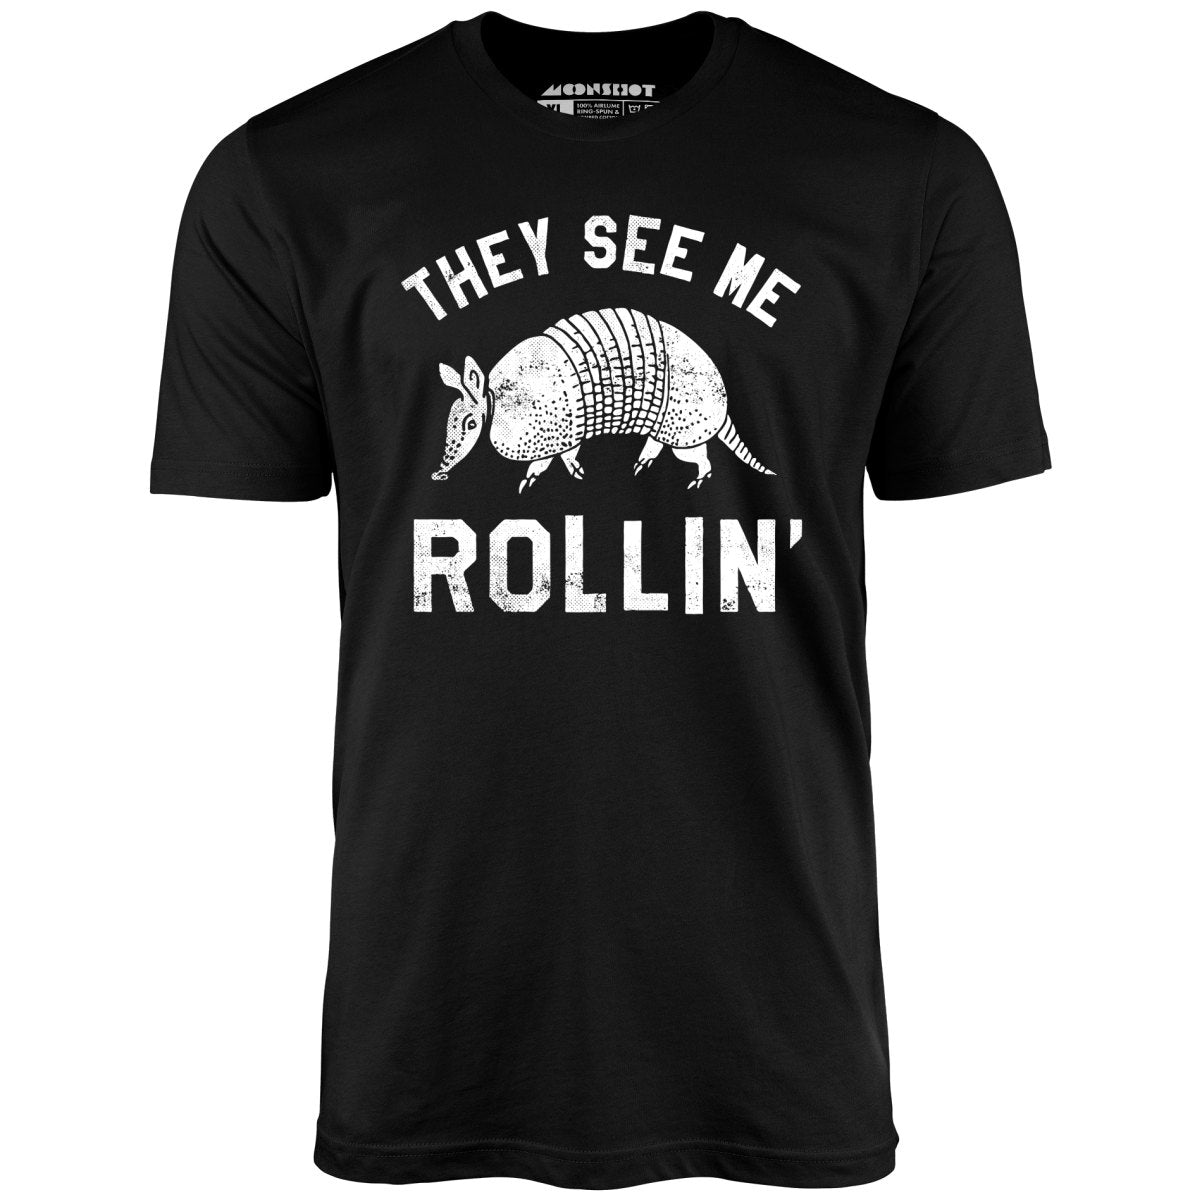 They See Me Rollin' - Unisex T-Shirt